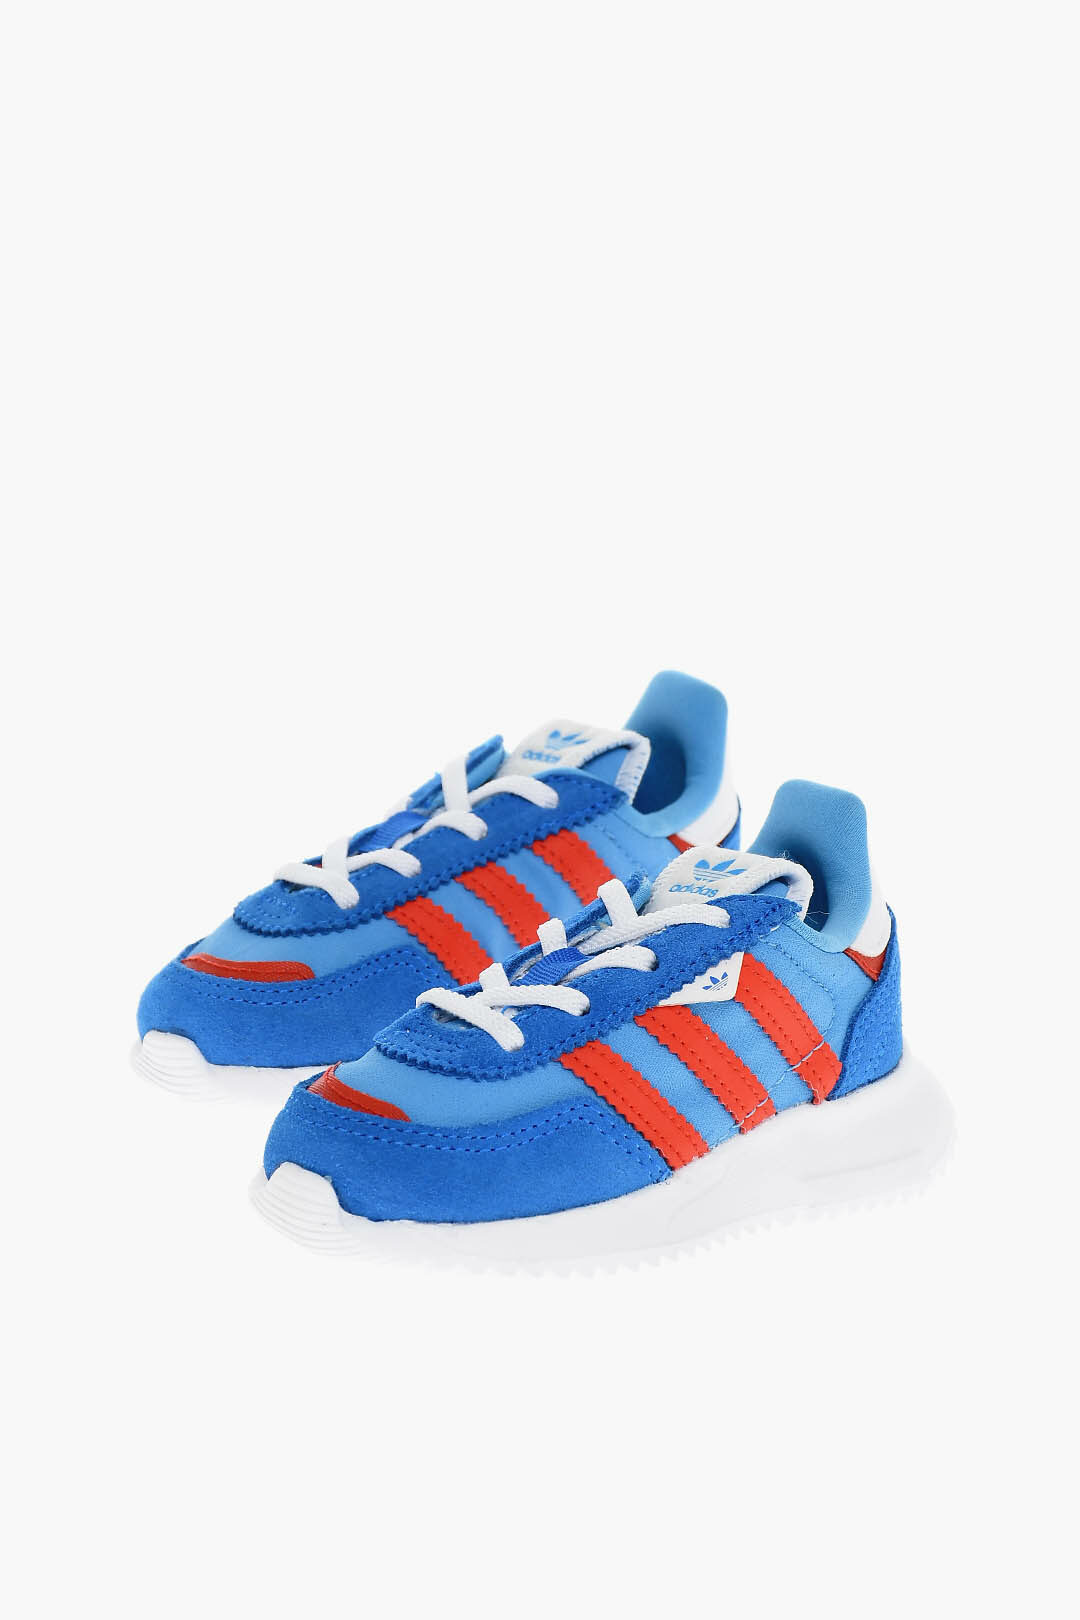 Valiente Sastre Reorganizar Adidas Kids Lace-up RETROPY F2 Sneakers with Side Stripes unisex children  boys girls - Glamood Outlet